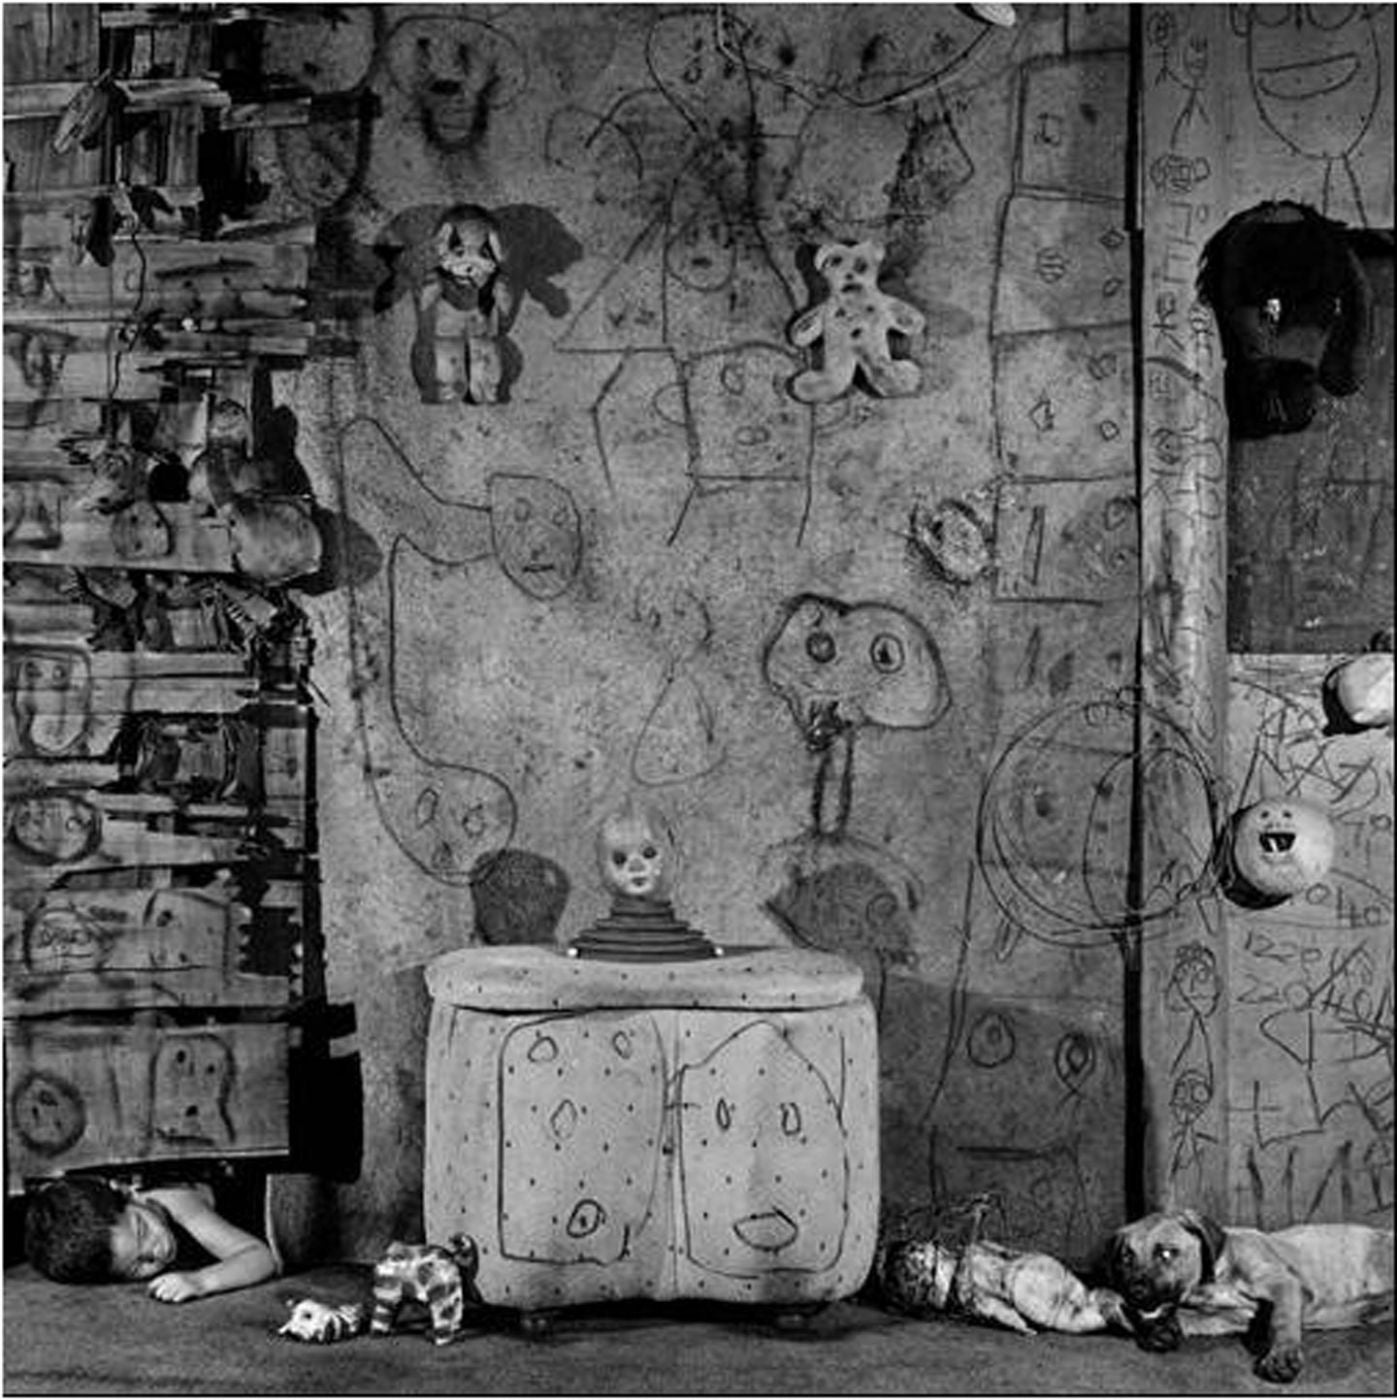 Roger Ballen: Boarding House, Limited Edition (with Gelatin Silver Print, "Boarding House, 2008" Variant)